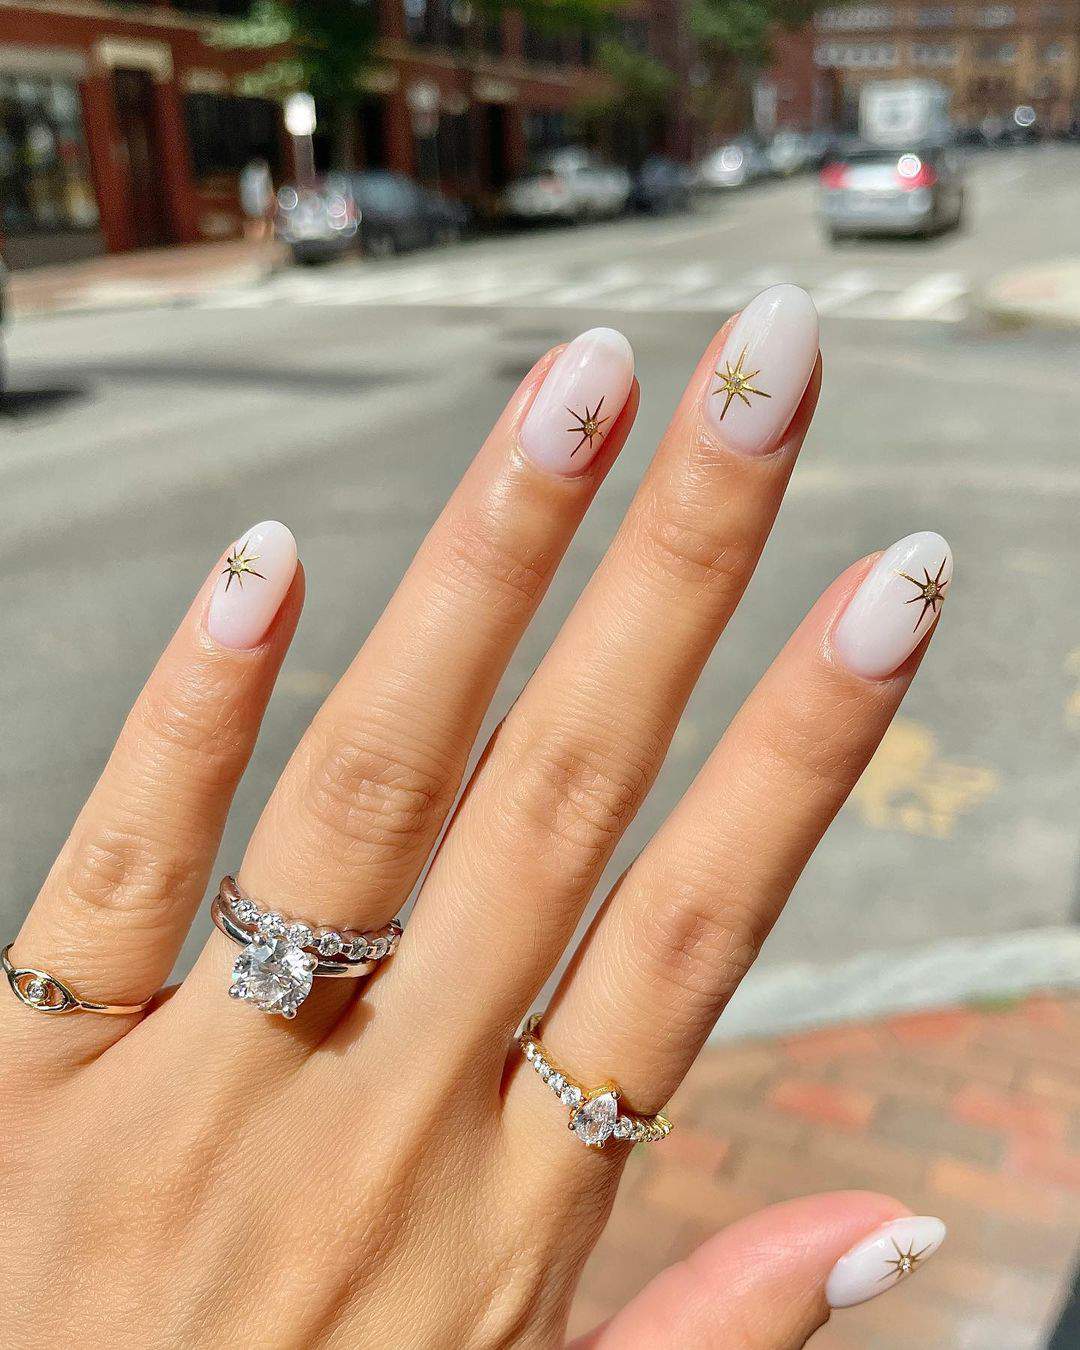 The 100+ Best Nail Designs Trends And Ideas In 2021 images 7